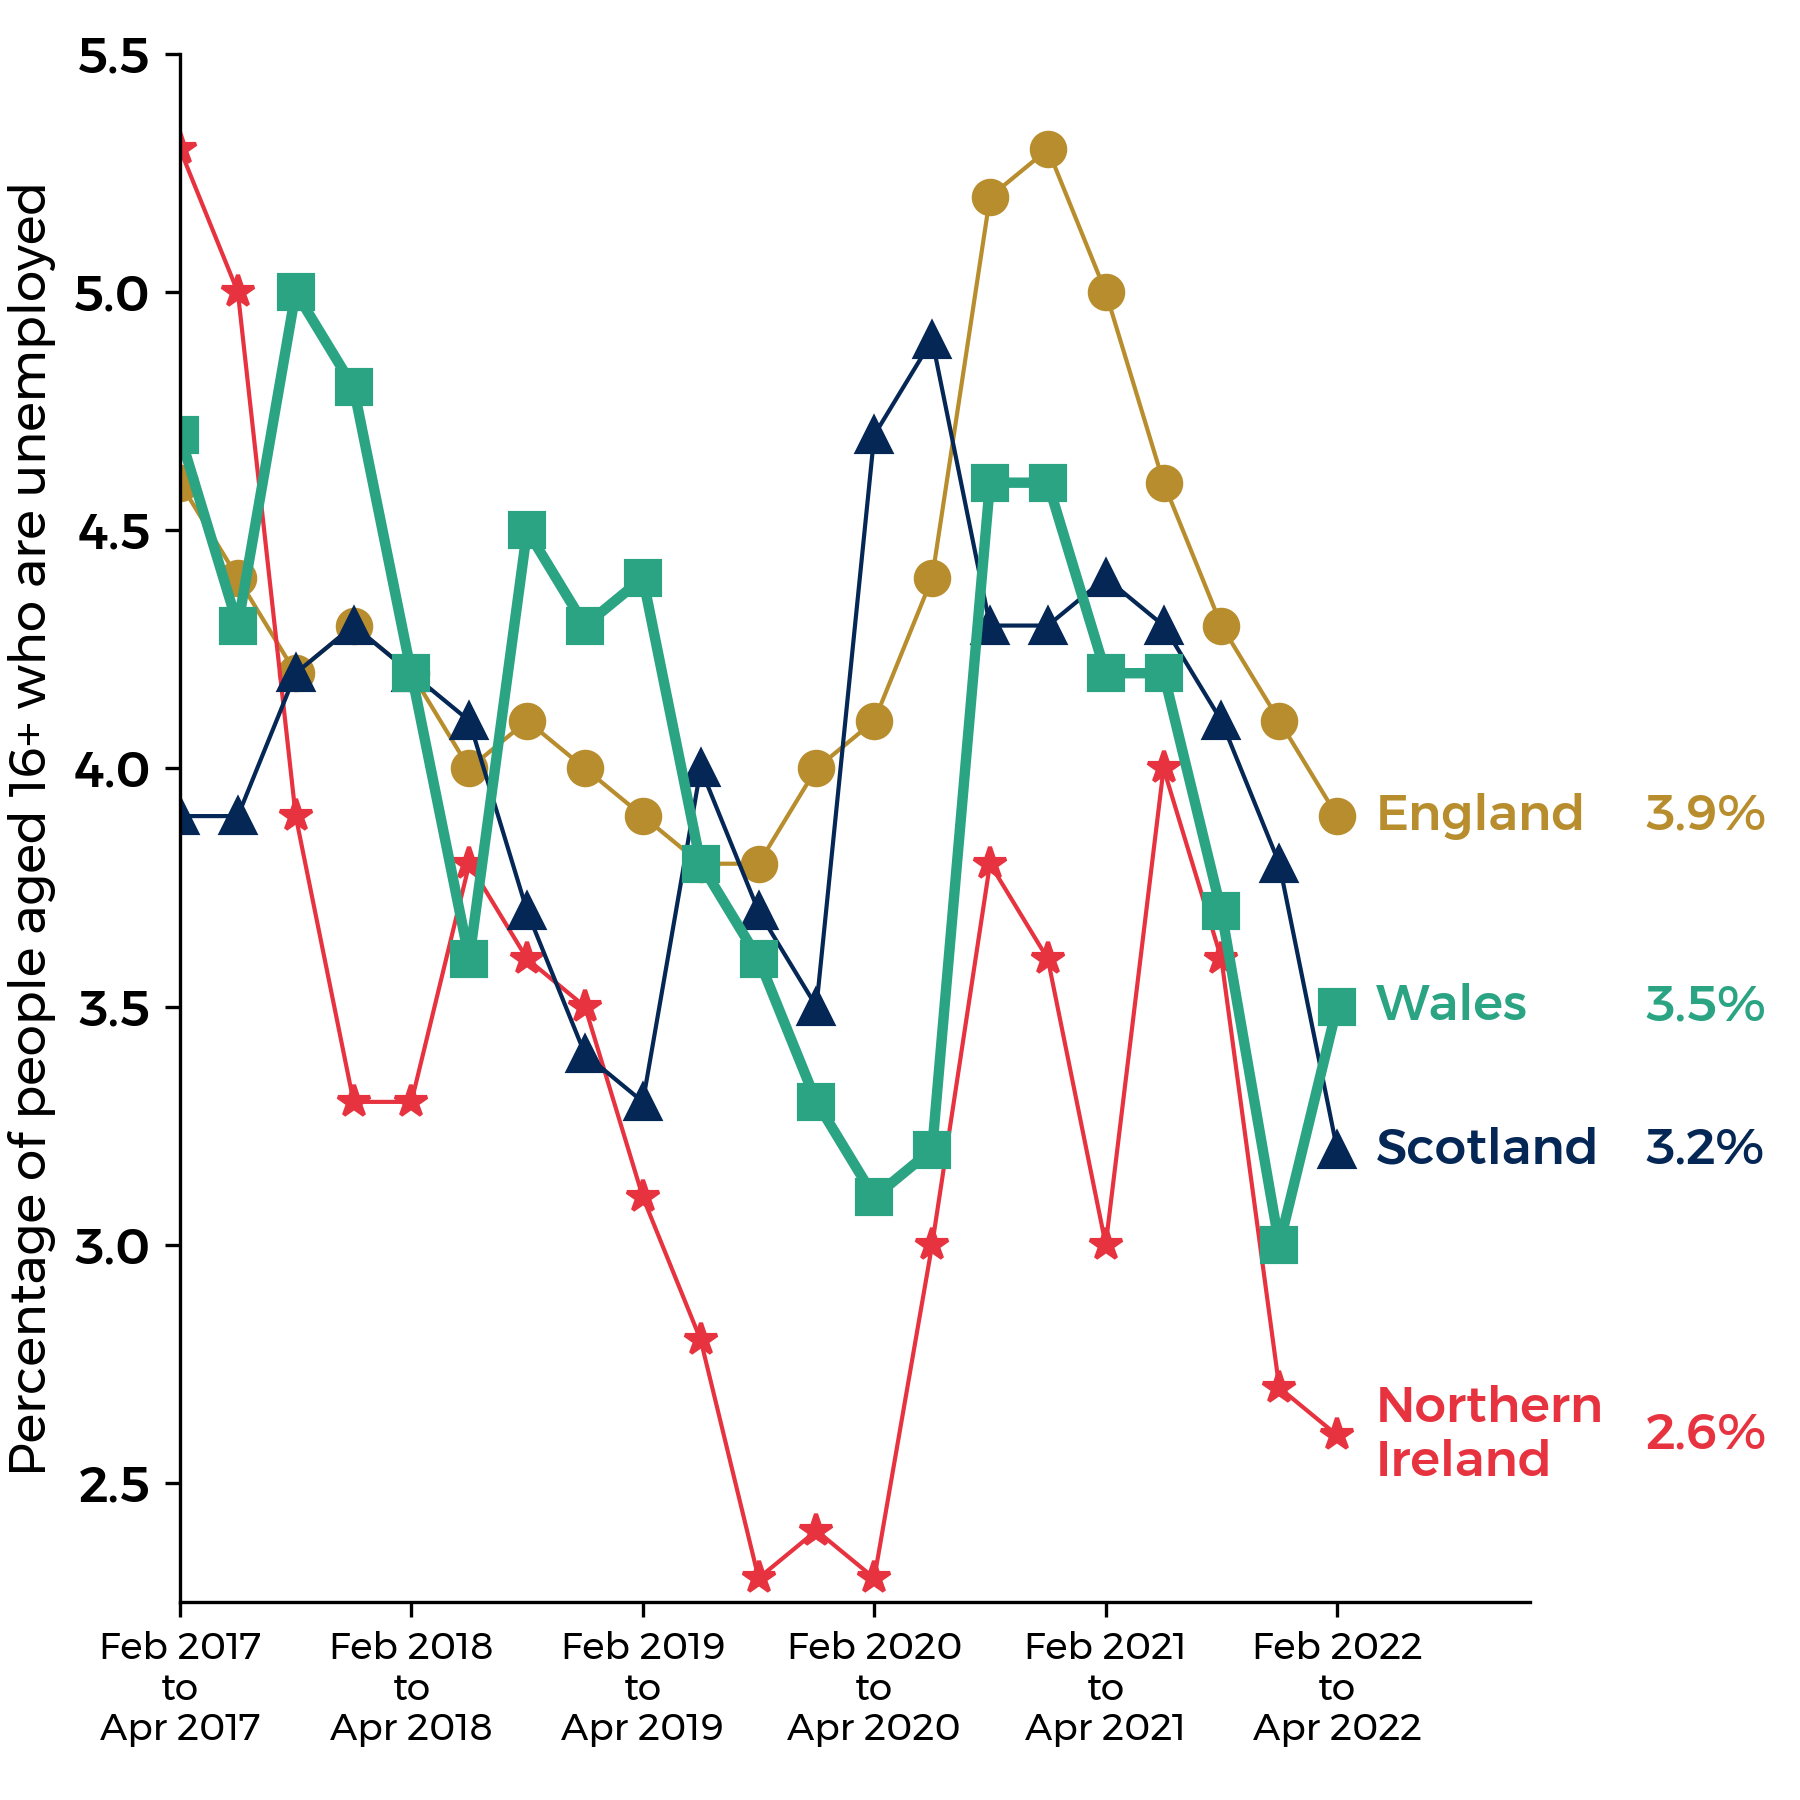 Line graph of age 16+ unemployment rates for Wales, England, Scotland and Northern Ireland. All show an overall decrease to under 4% in 2019. This was followed by a sharp overall increase since the beginning of 2020. Current figures are stated above.vvvvvvvvvvvvvvvv